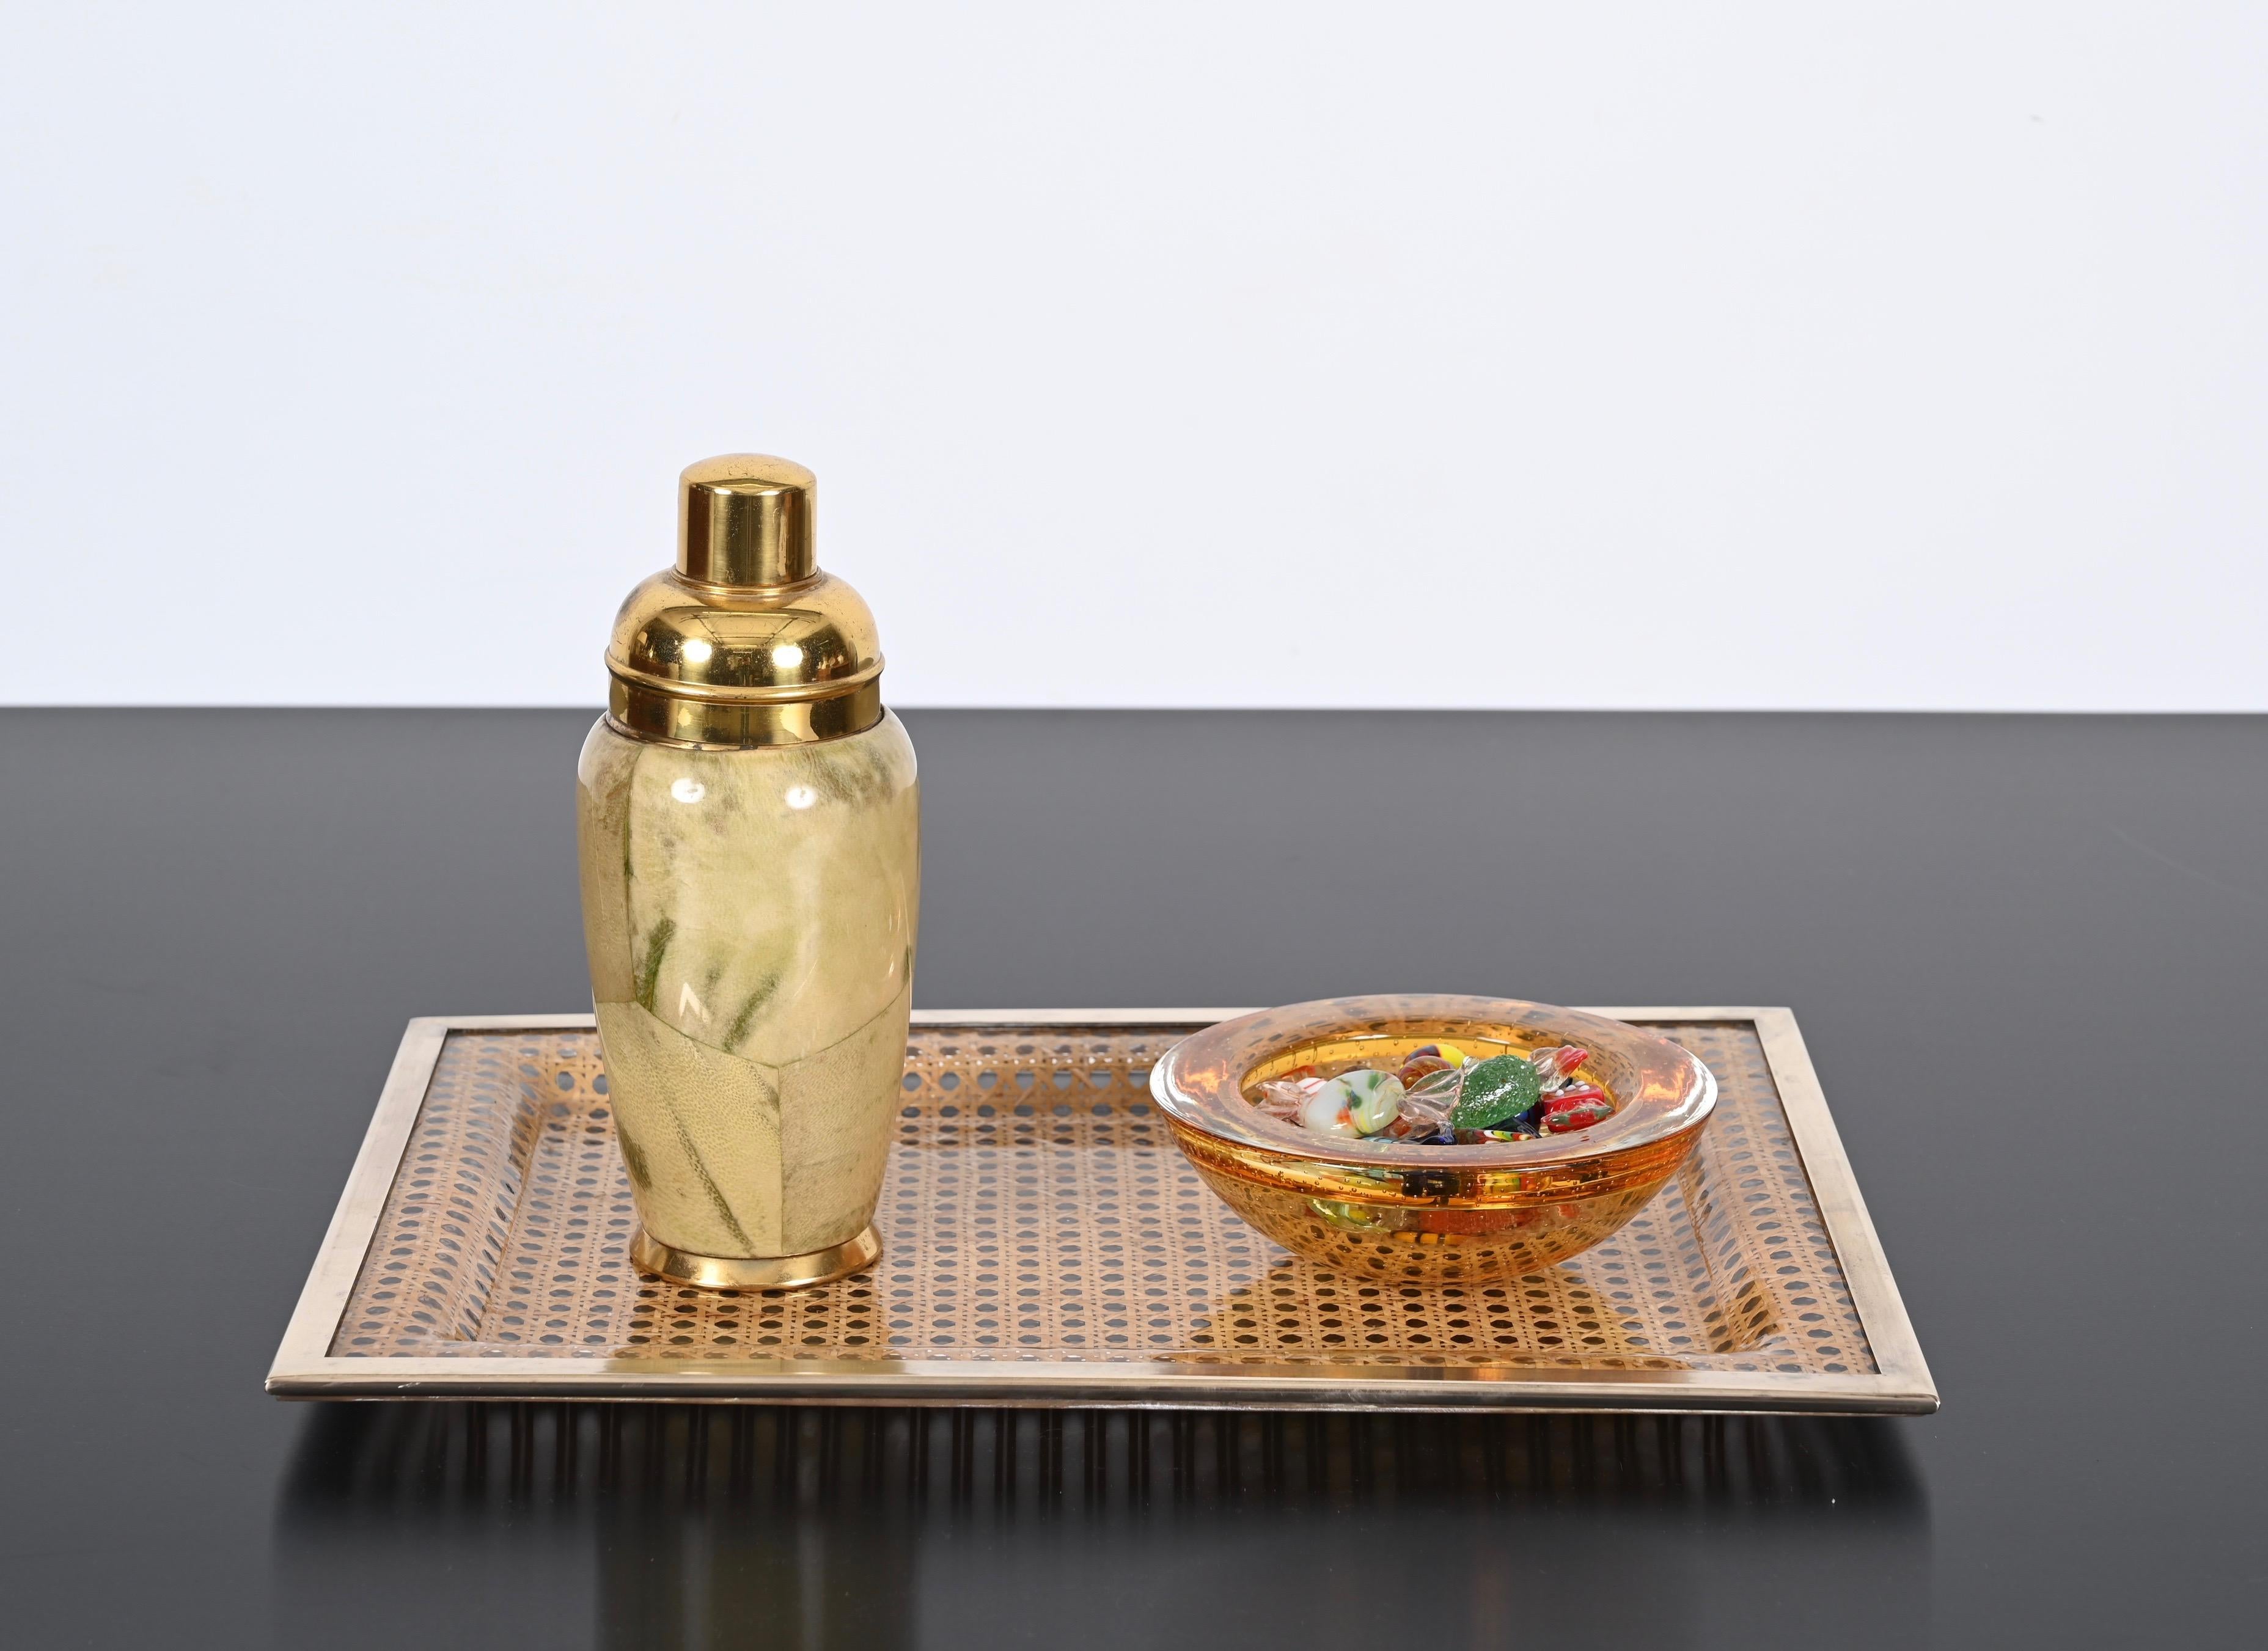 Wonderful midcentury rectangular serving tray in lucite Vienna straw and brass. This amazing piece was designed in France during the 1970s, following the style of Christian Dior.

This large and elegant midcentury serving tray consists of a large